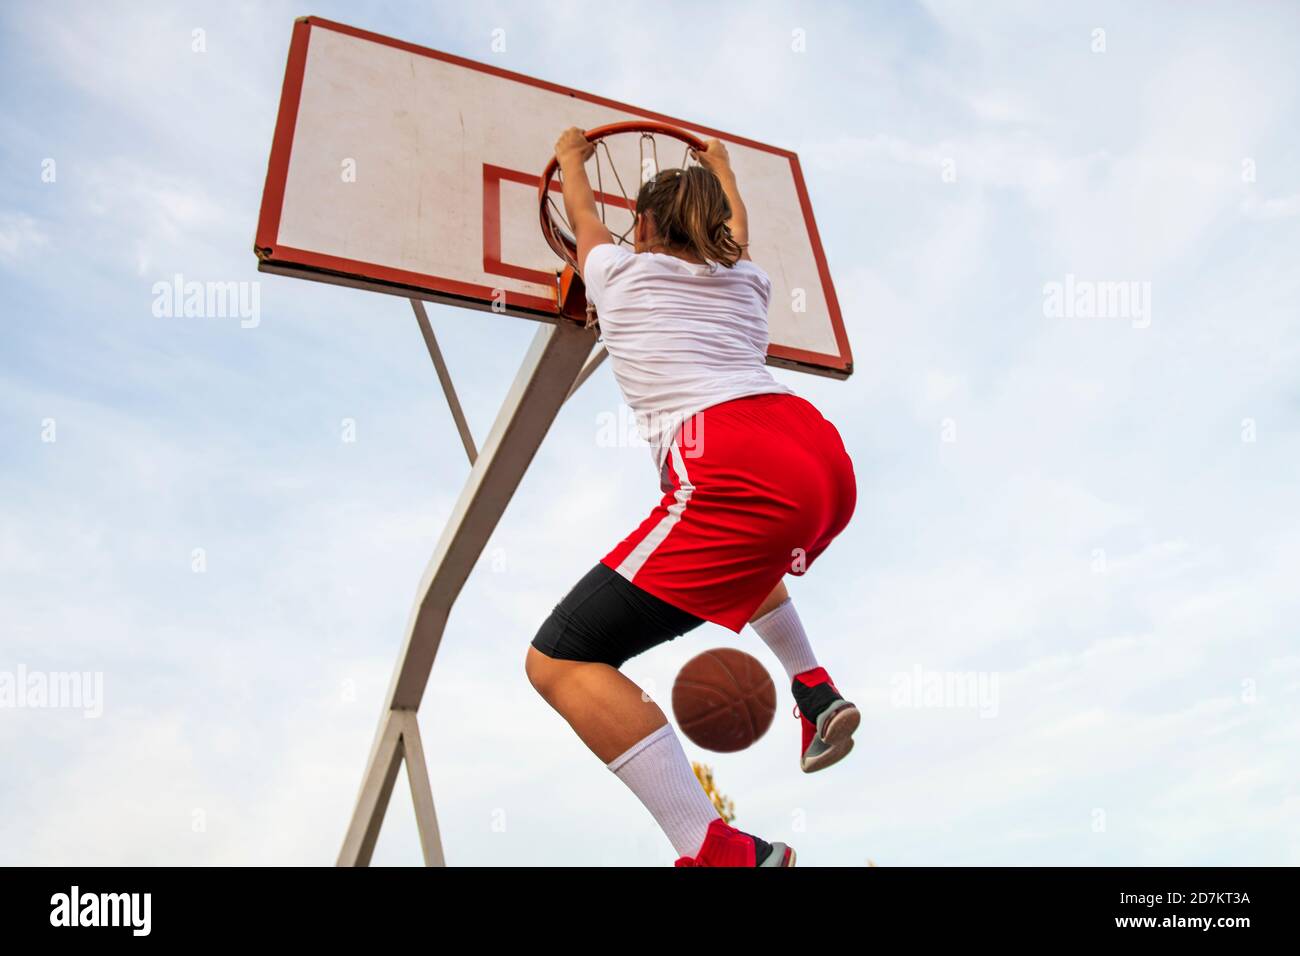 Females playing basketball on street court. Woman streetball player making slam dunk in a basketball game. Stock Photo